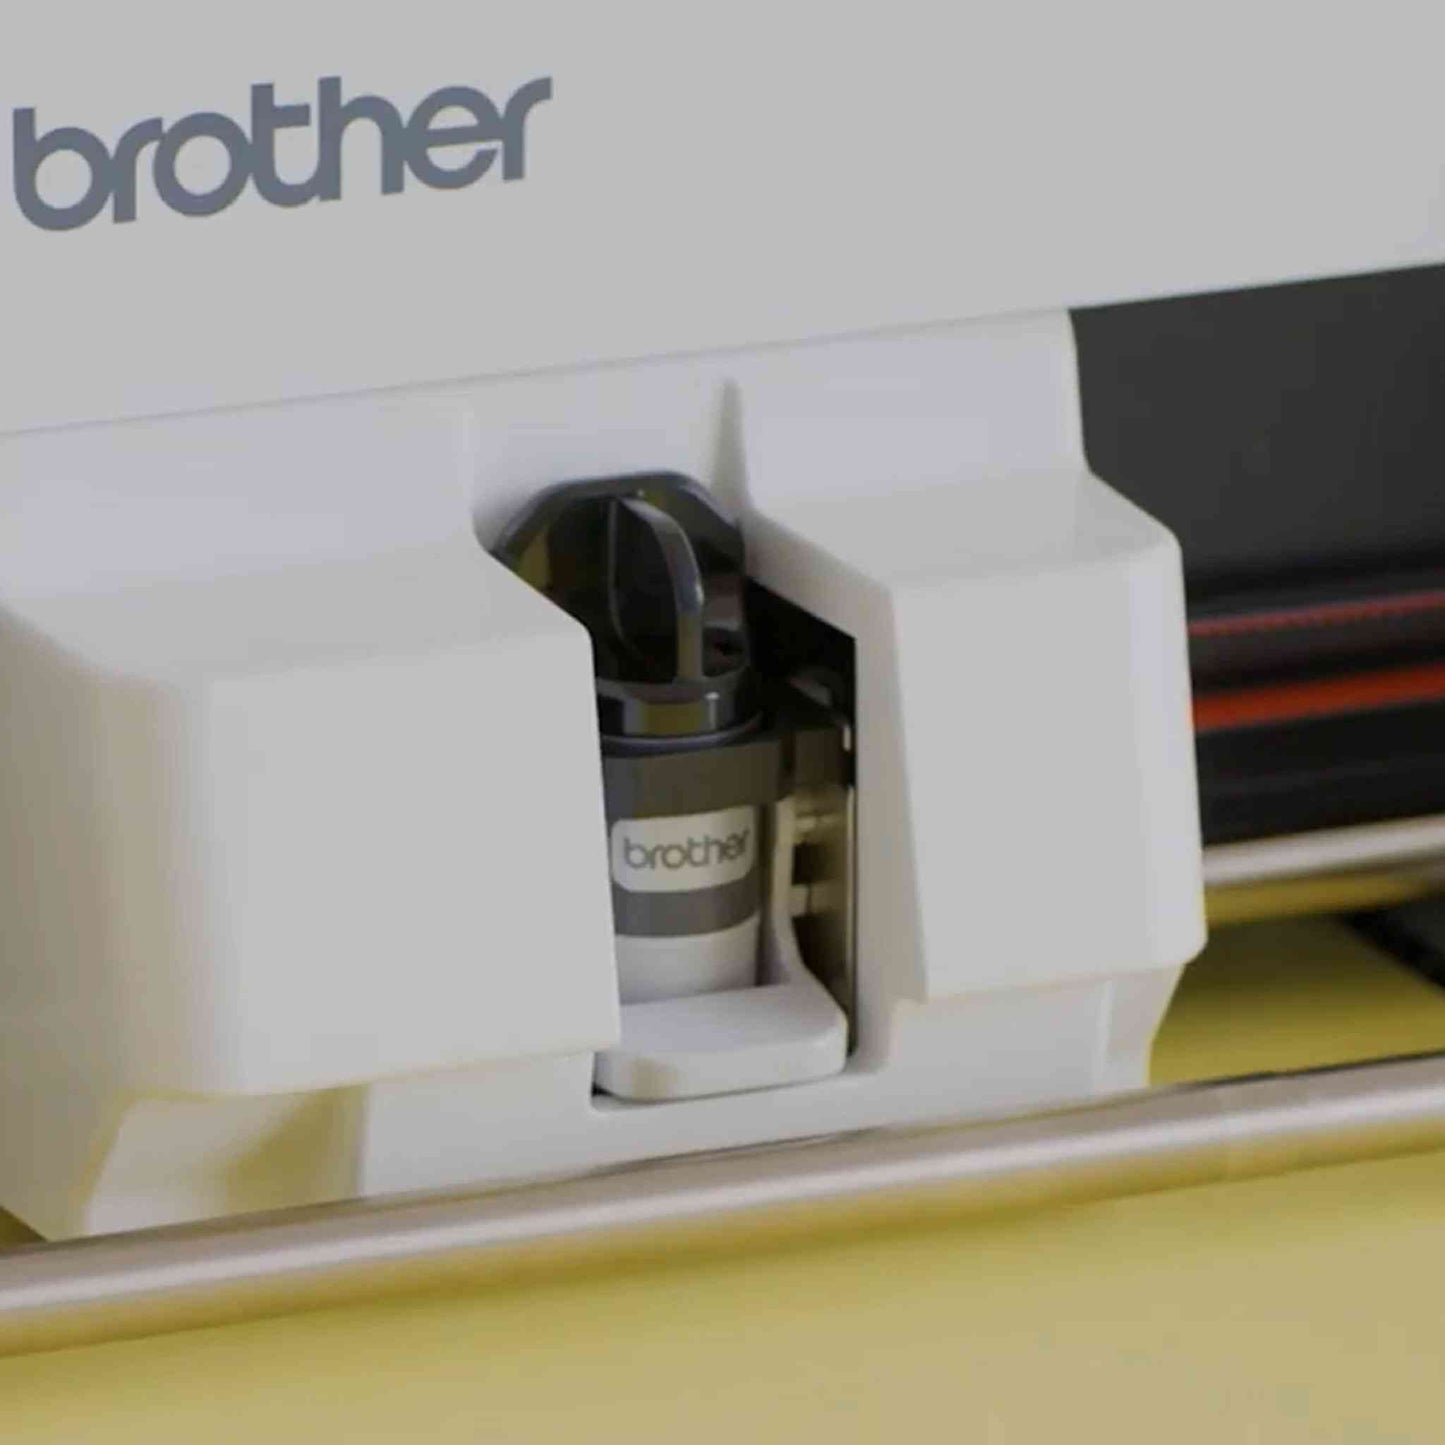 Brother Scanncut DX1250 autoblade close up.